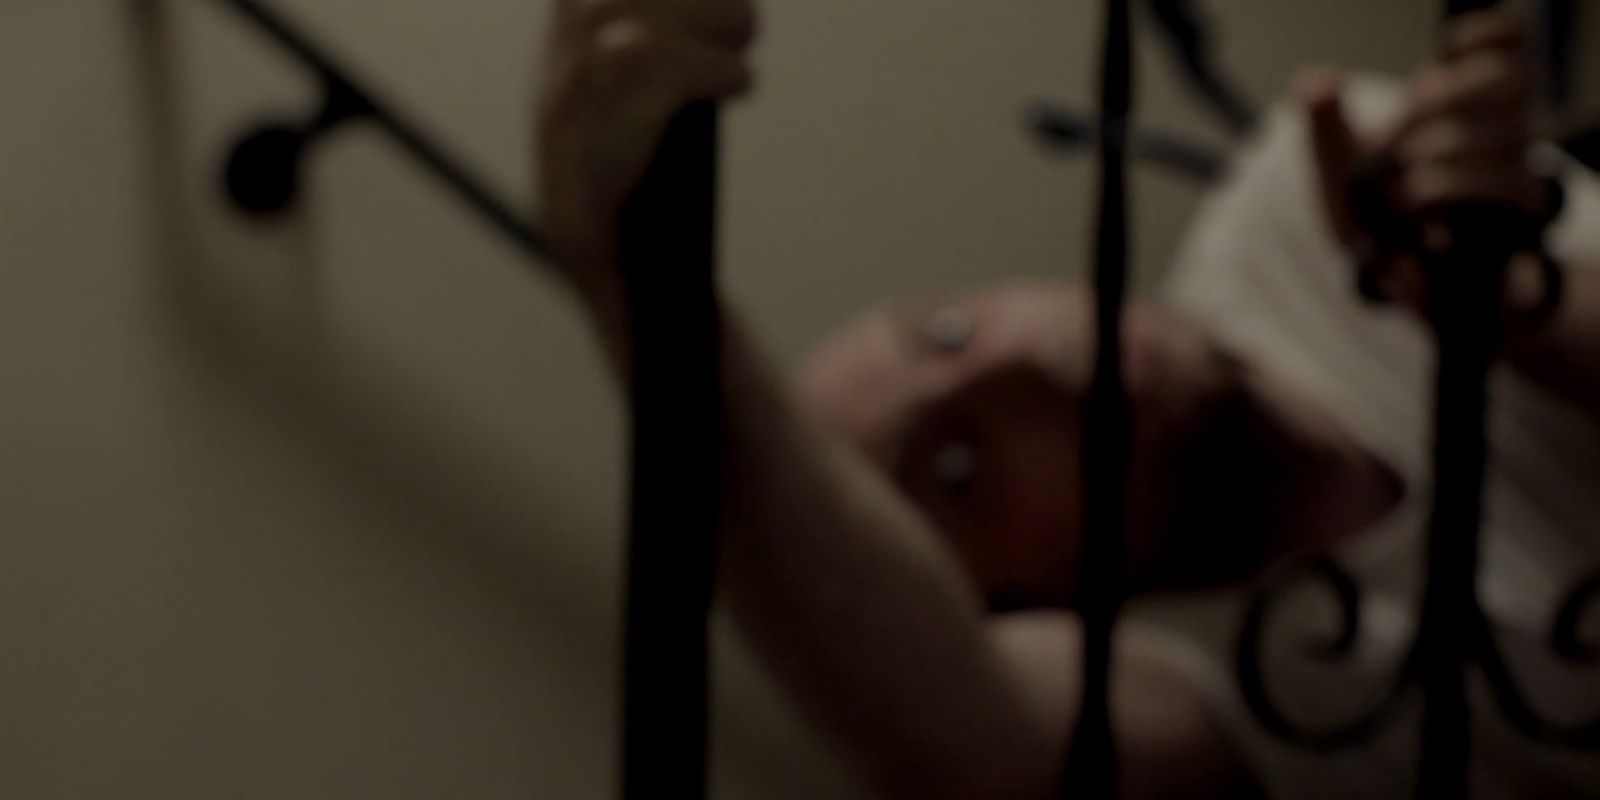 The troll takes Daniel back in Absentia. The image is purposefully blurry. Daniel grips the stair railing as the offscreen troll, seen only as two spider like fingers, tries to pull him away.